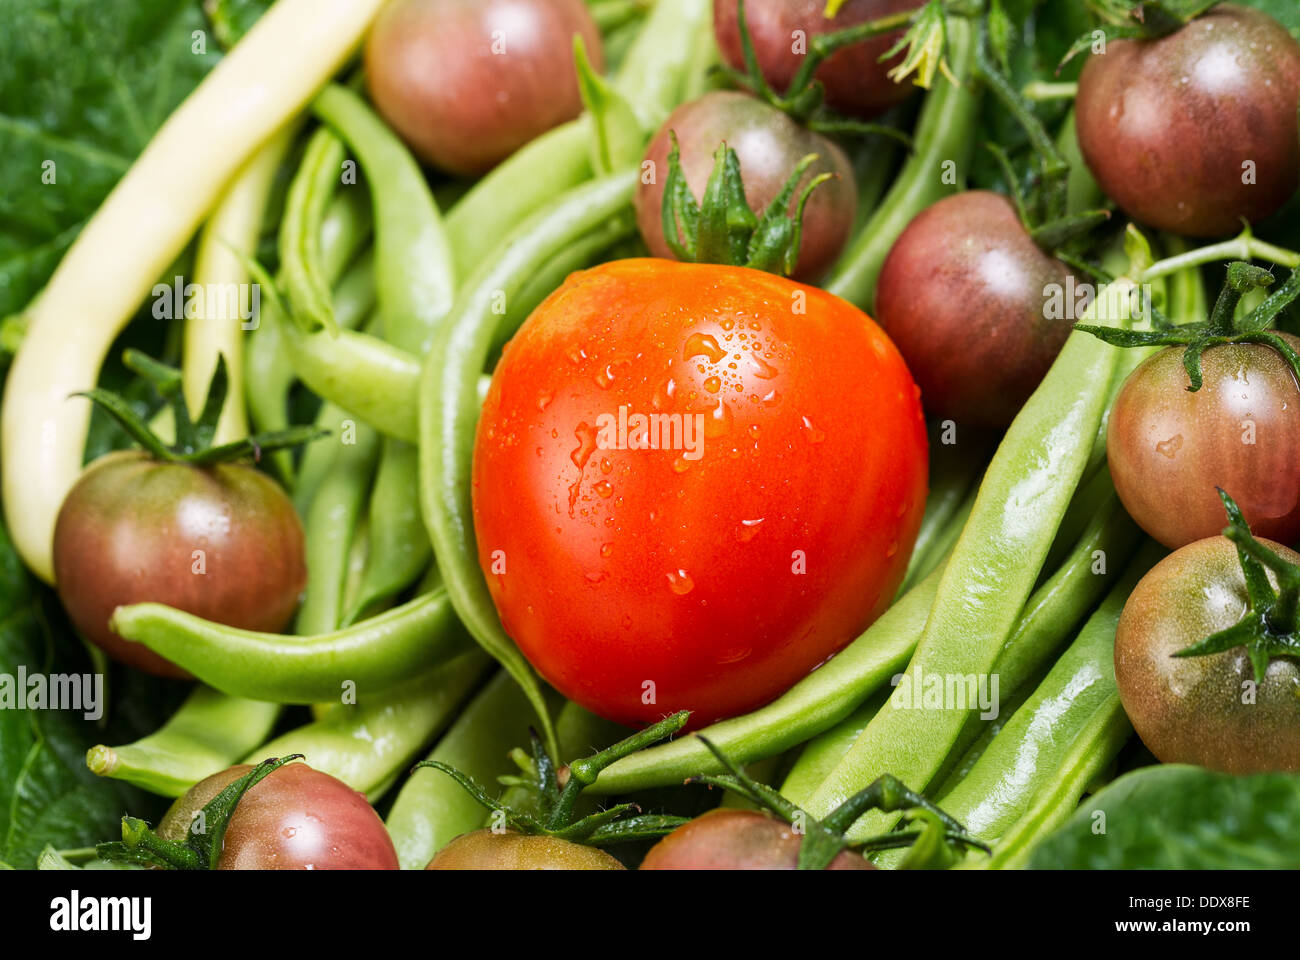 Horizontal photo of a single ripe tomato in a pile of freshly picked vegetables with water droplets on them Stock Photo